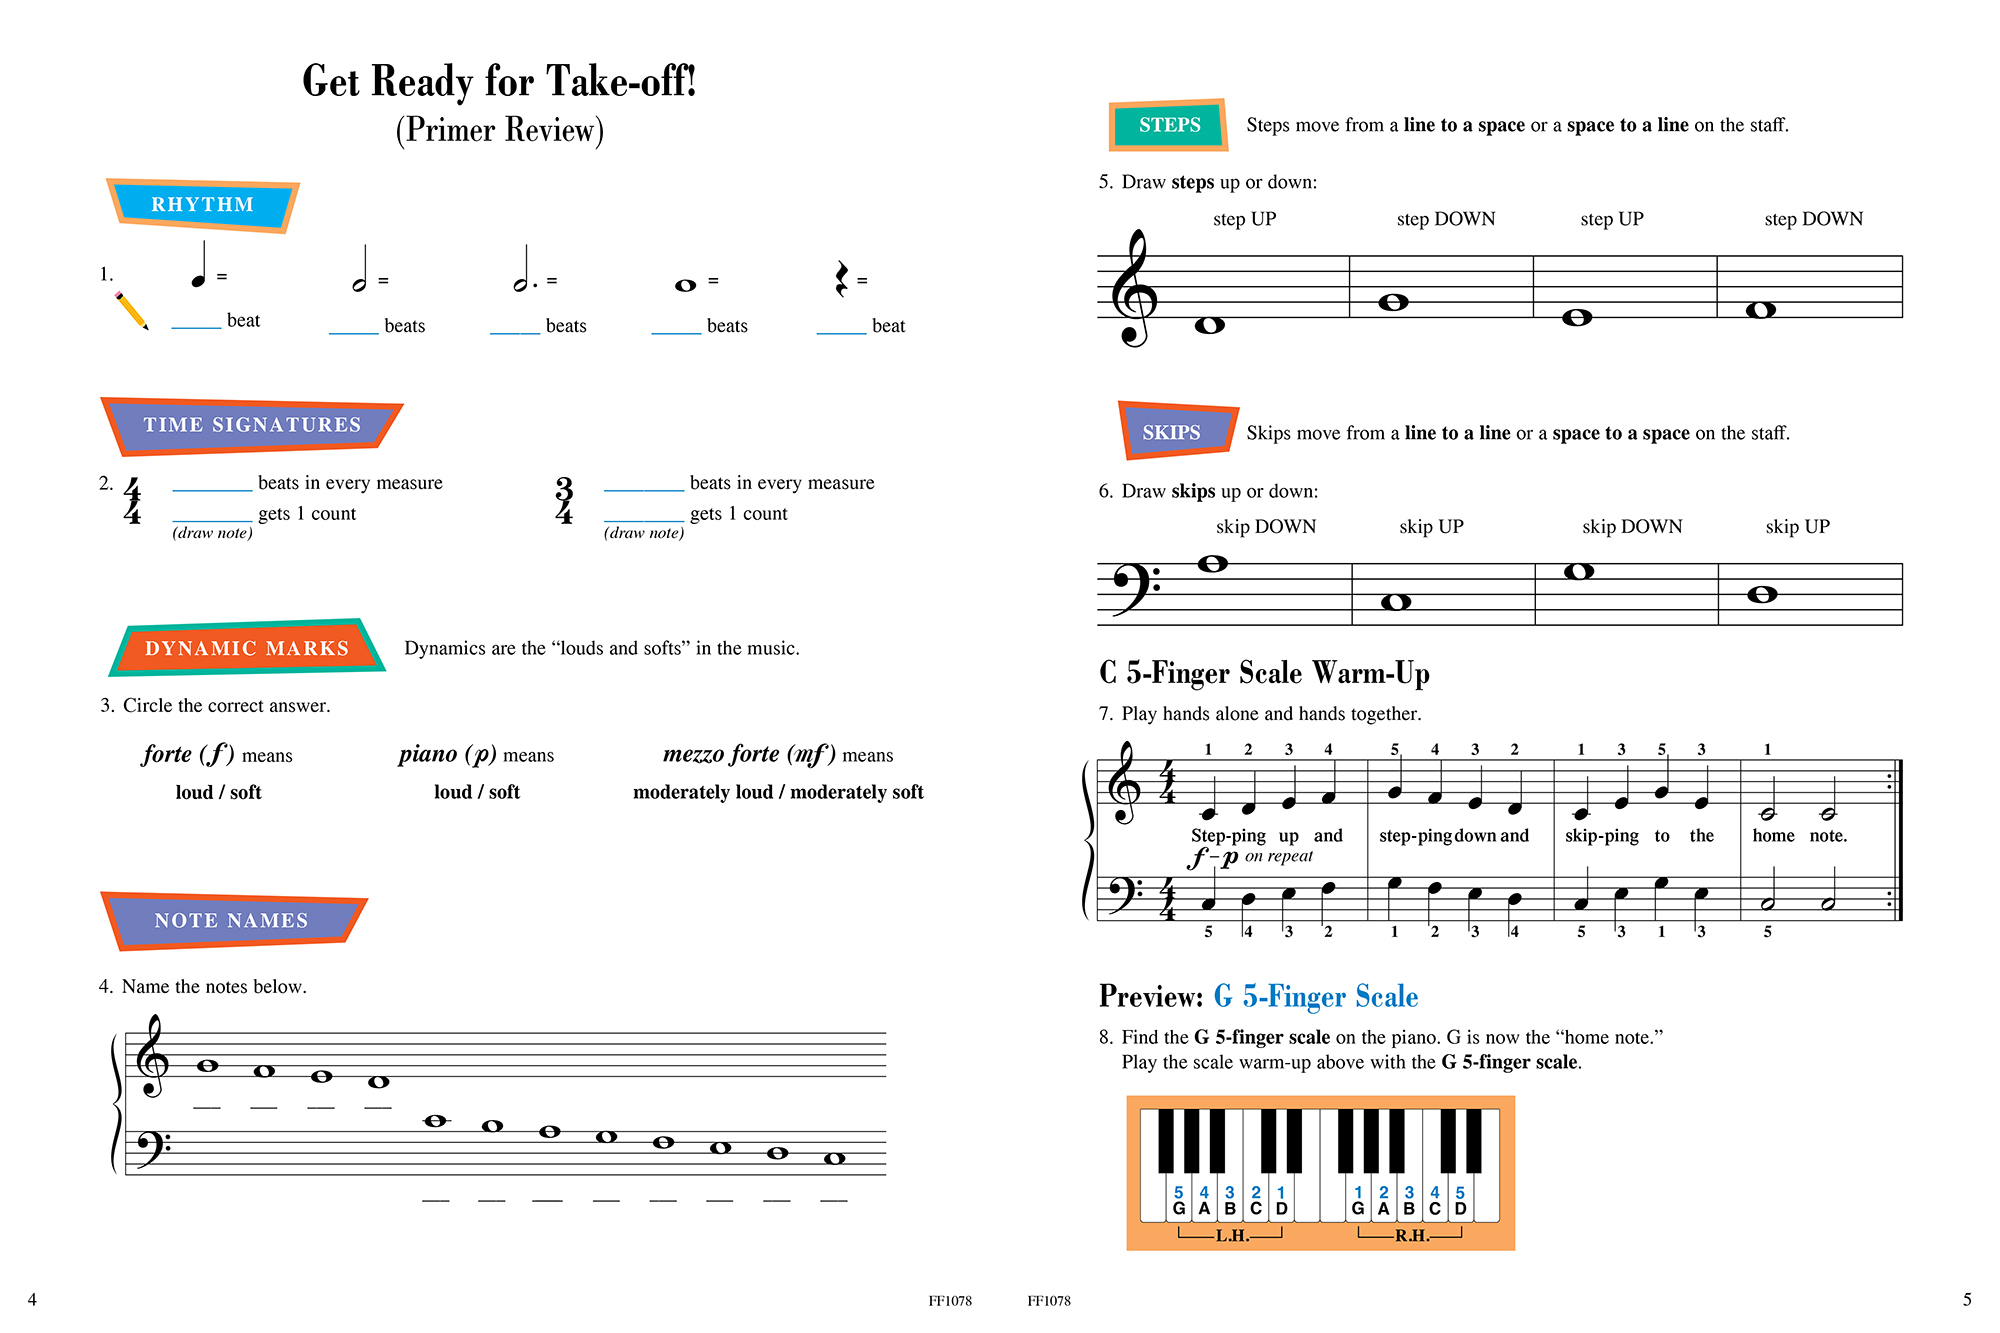 A Primer Piano Ear Training Game